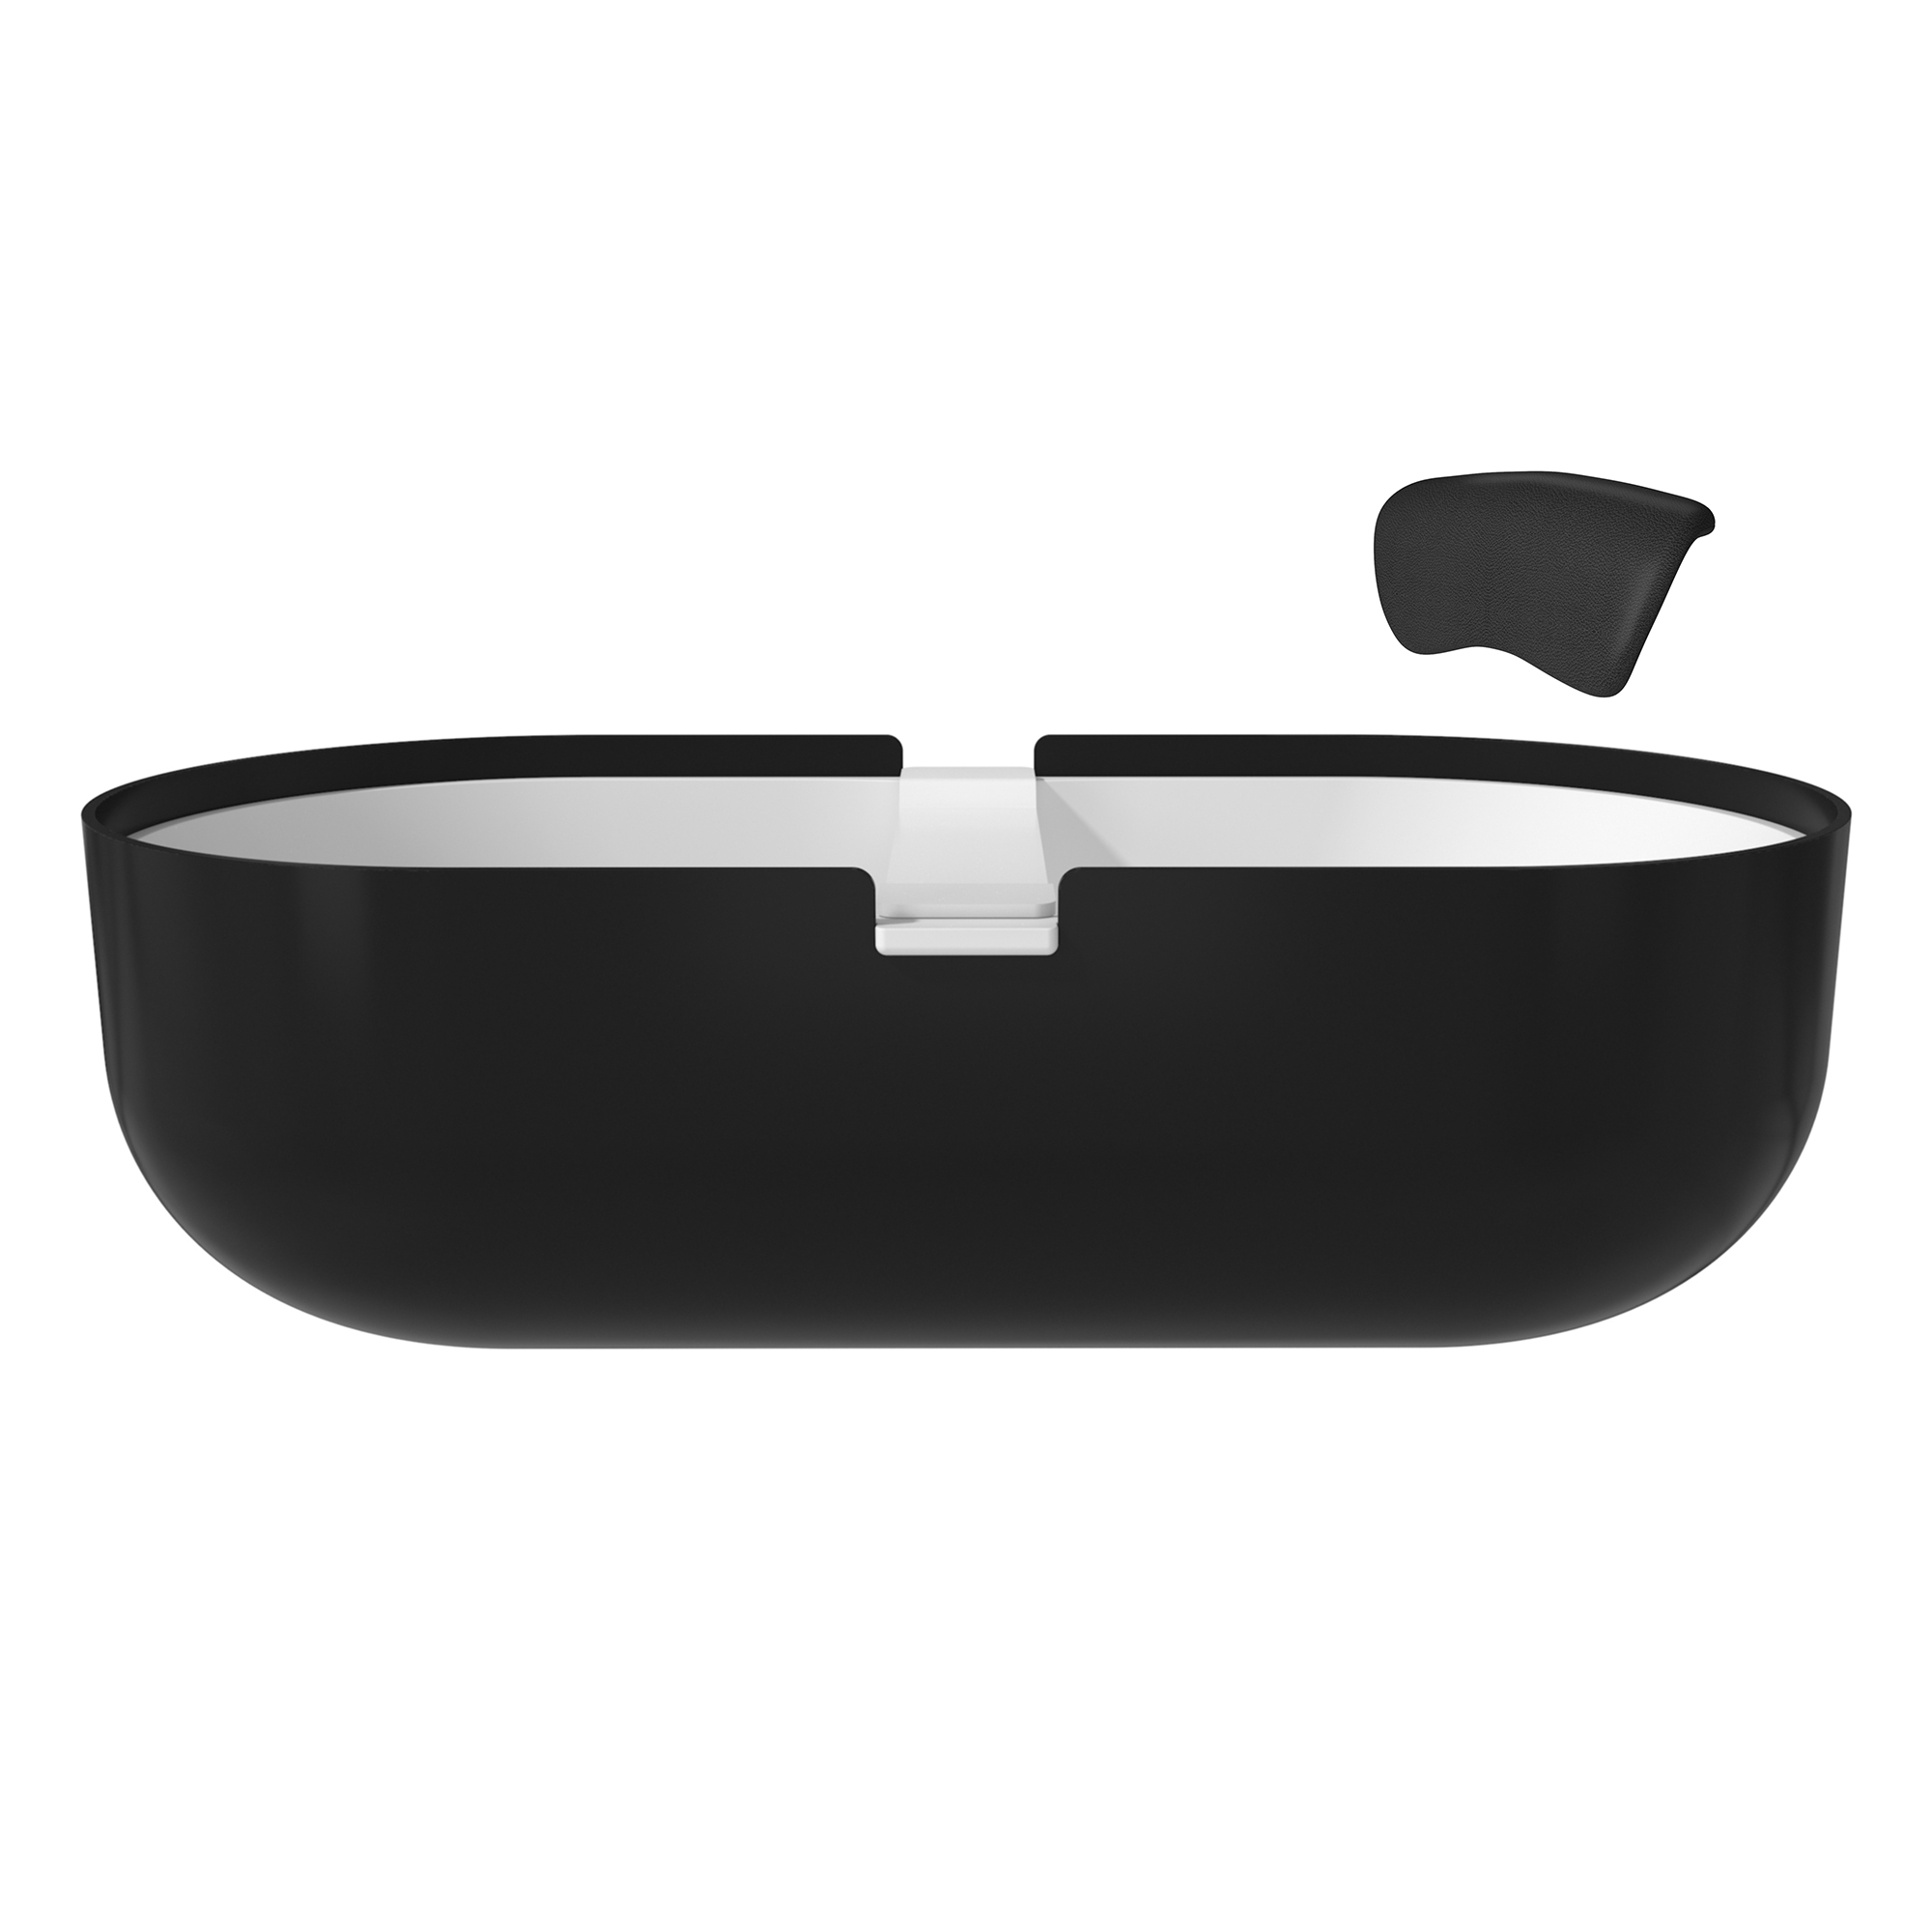 67/71" Black Outside and White Inside Artificial Stone Adult Freestanding Soaking Tub with Cushions and Shelves